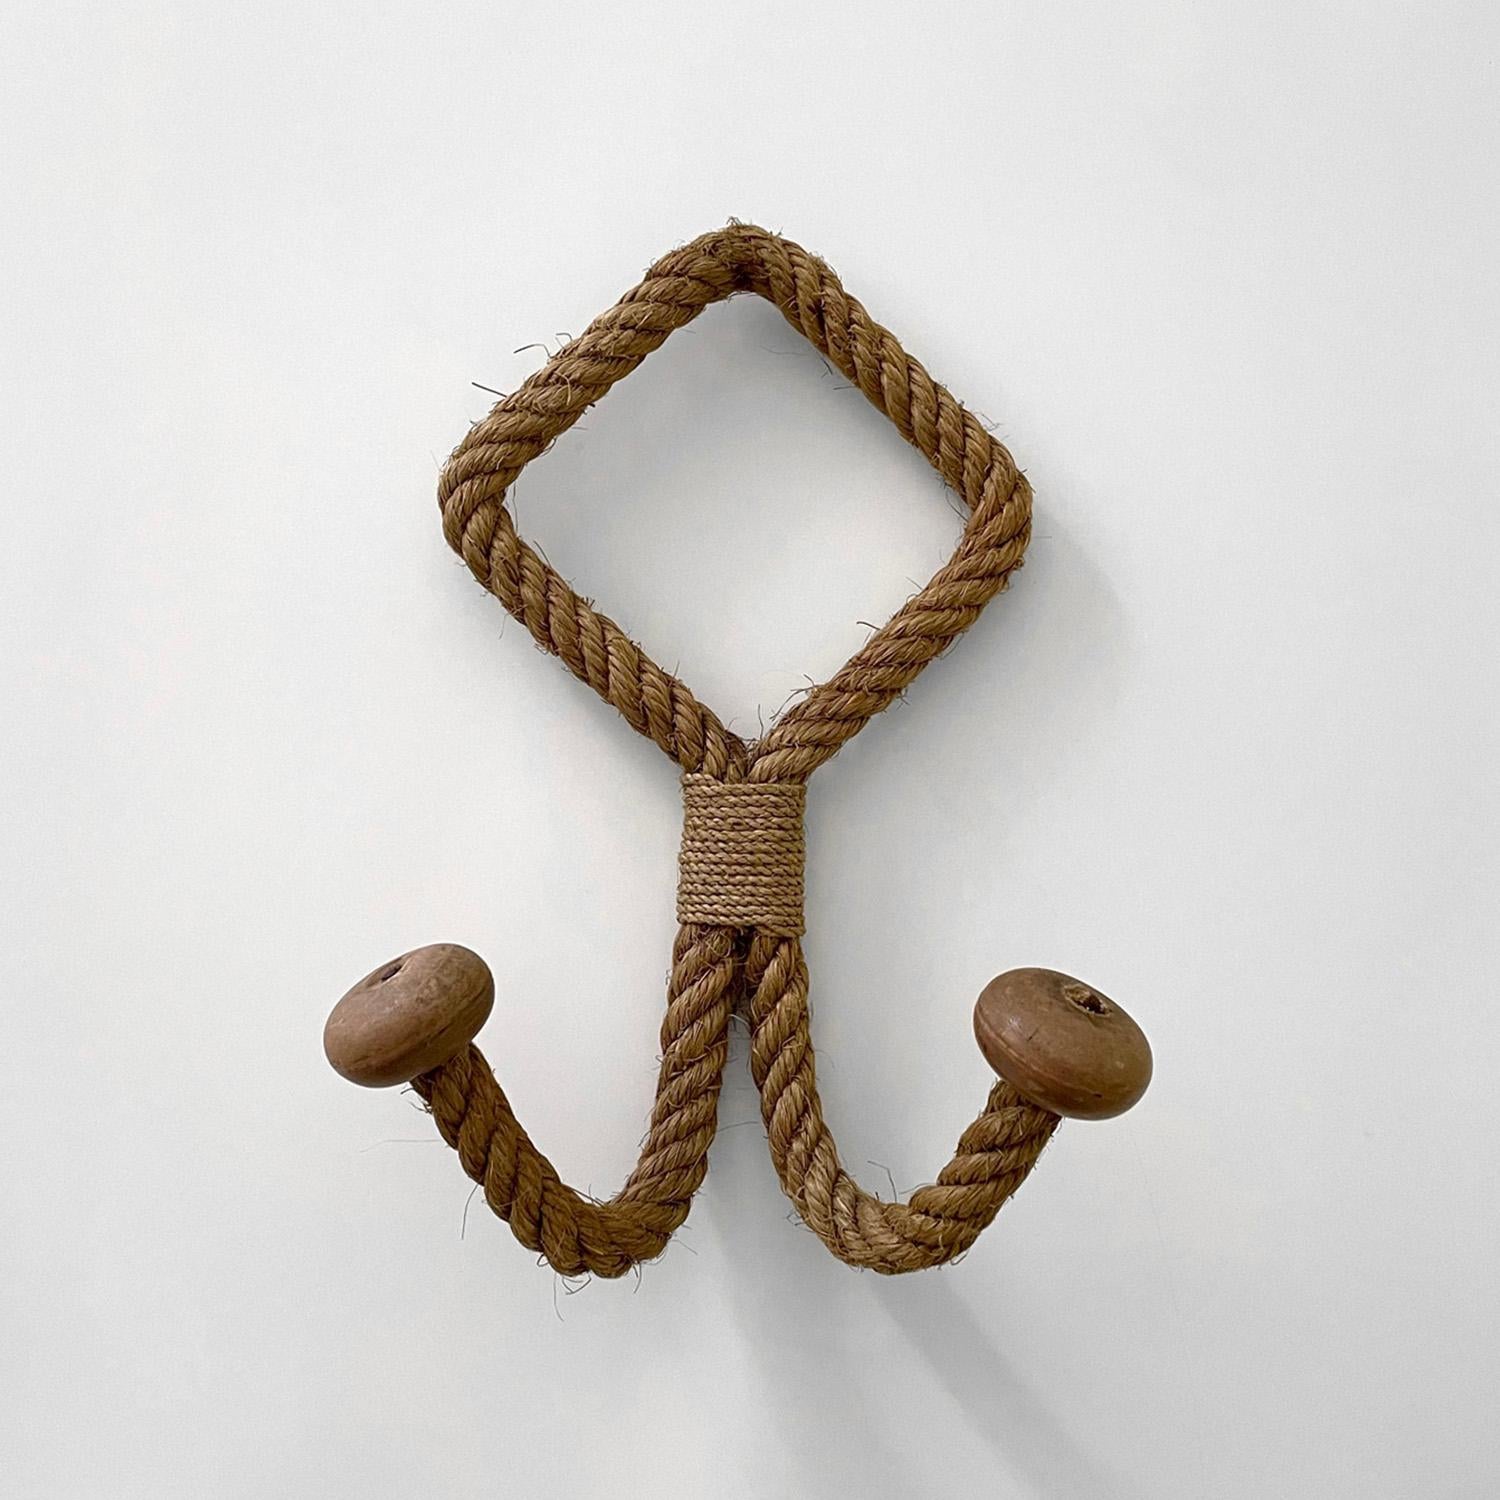 Adrien Audoux & Frida Minet French rope double wall hook coat rack 
France, circa 1950’s
Wall mounted sculpted rope frame with two upturned arch hooks 
Both hooks are finished with rounded pegs
Well worn patina from years of love and use
Last photo